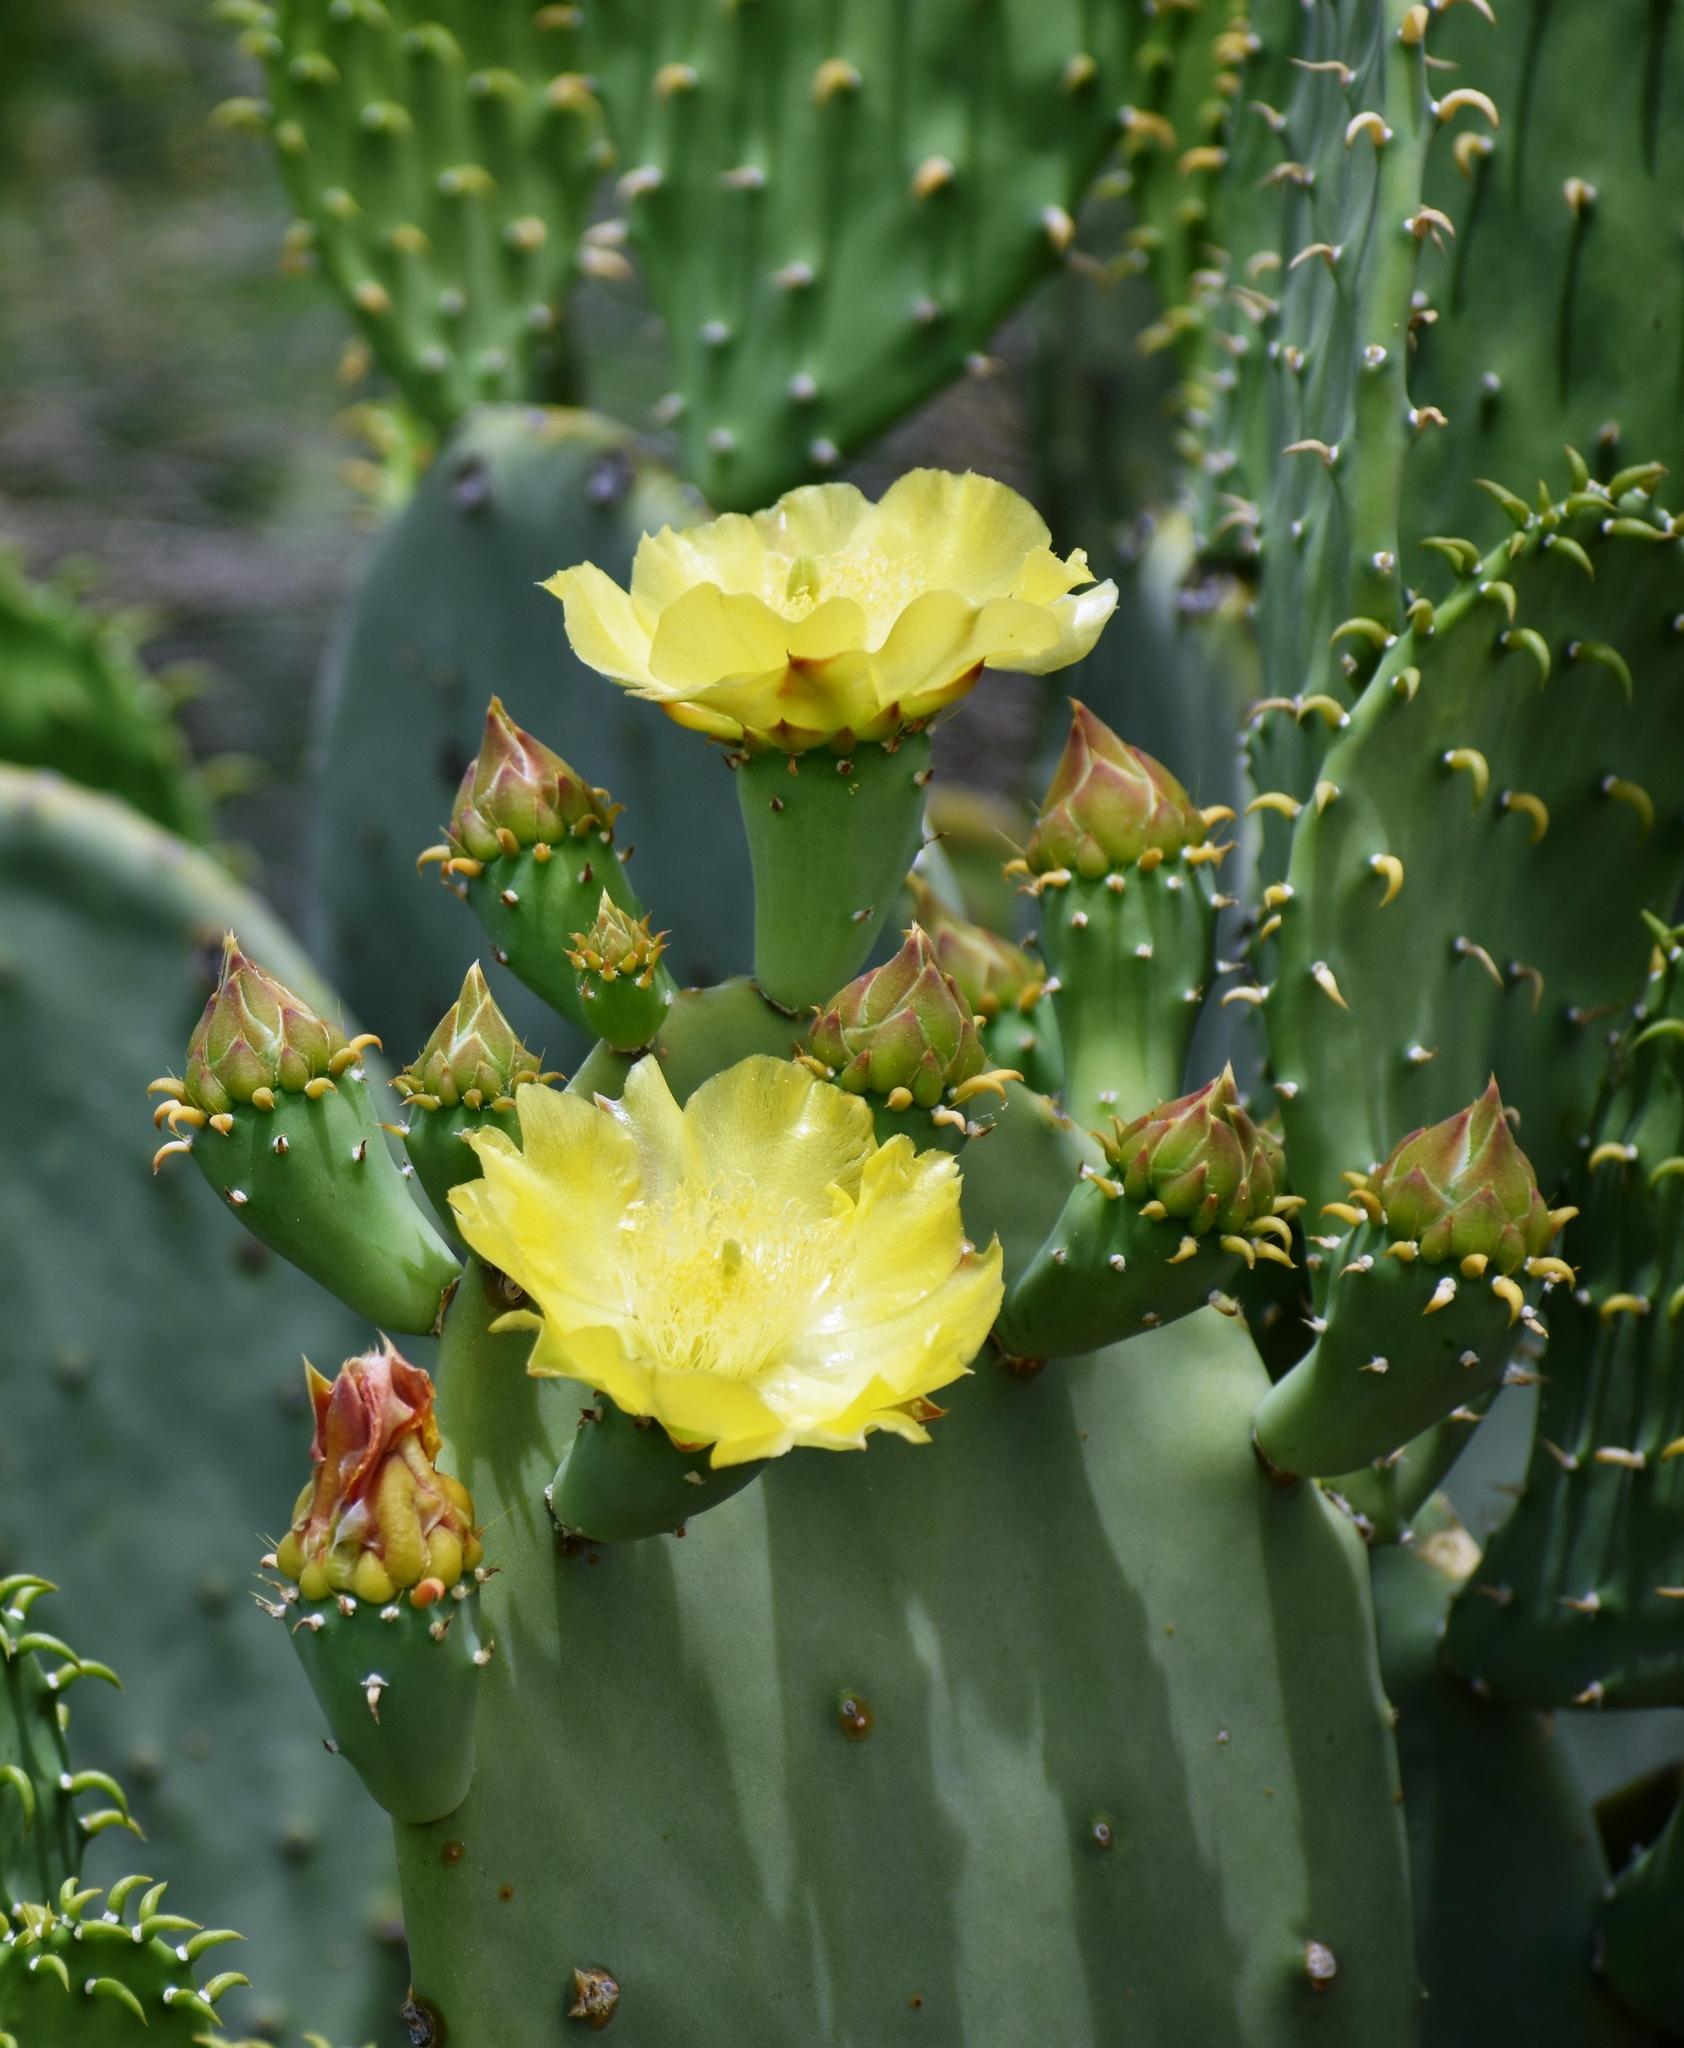 Prickly pear cactus with blooms and new growth